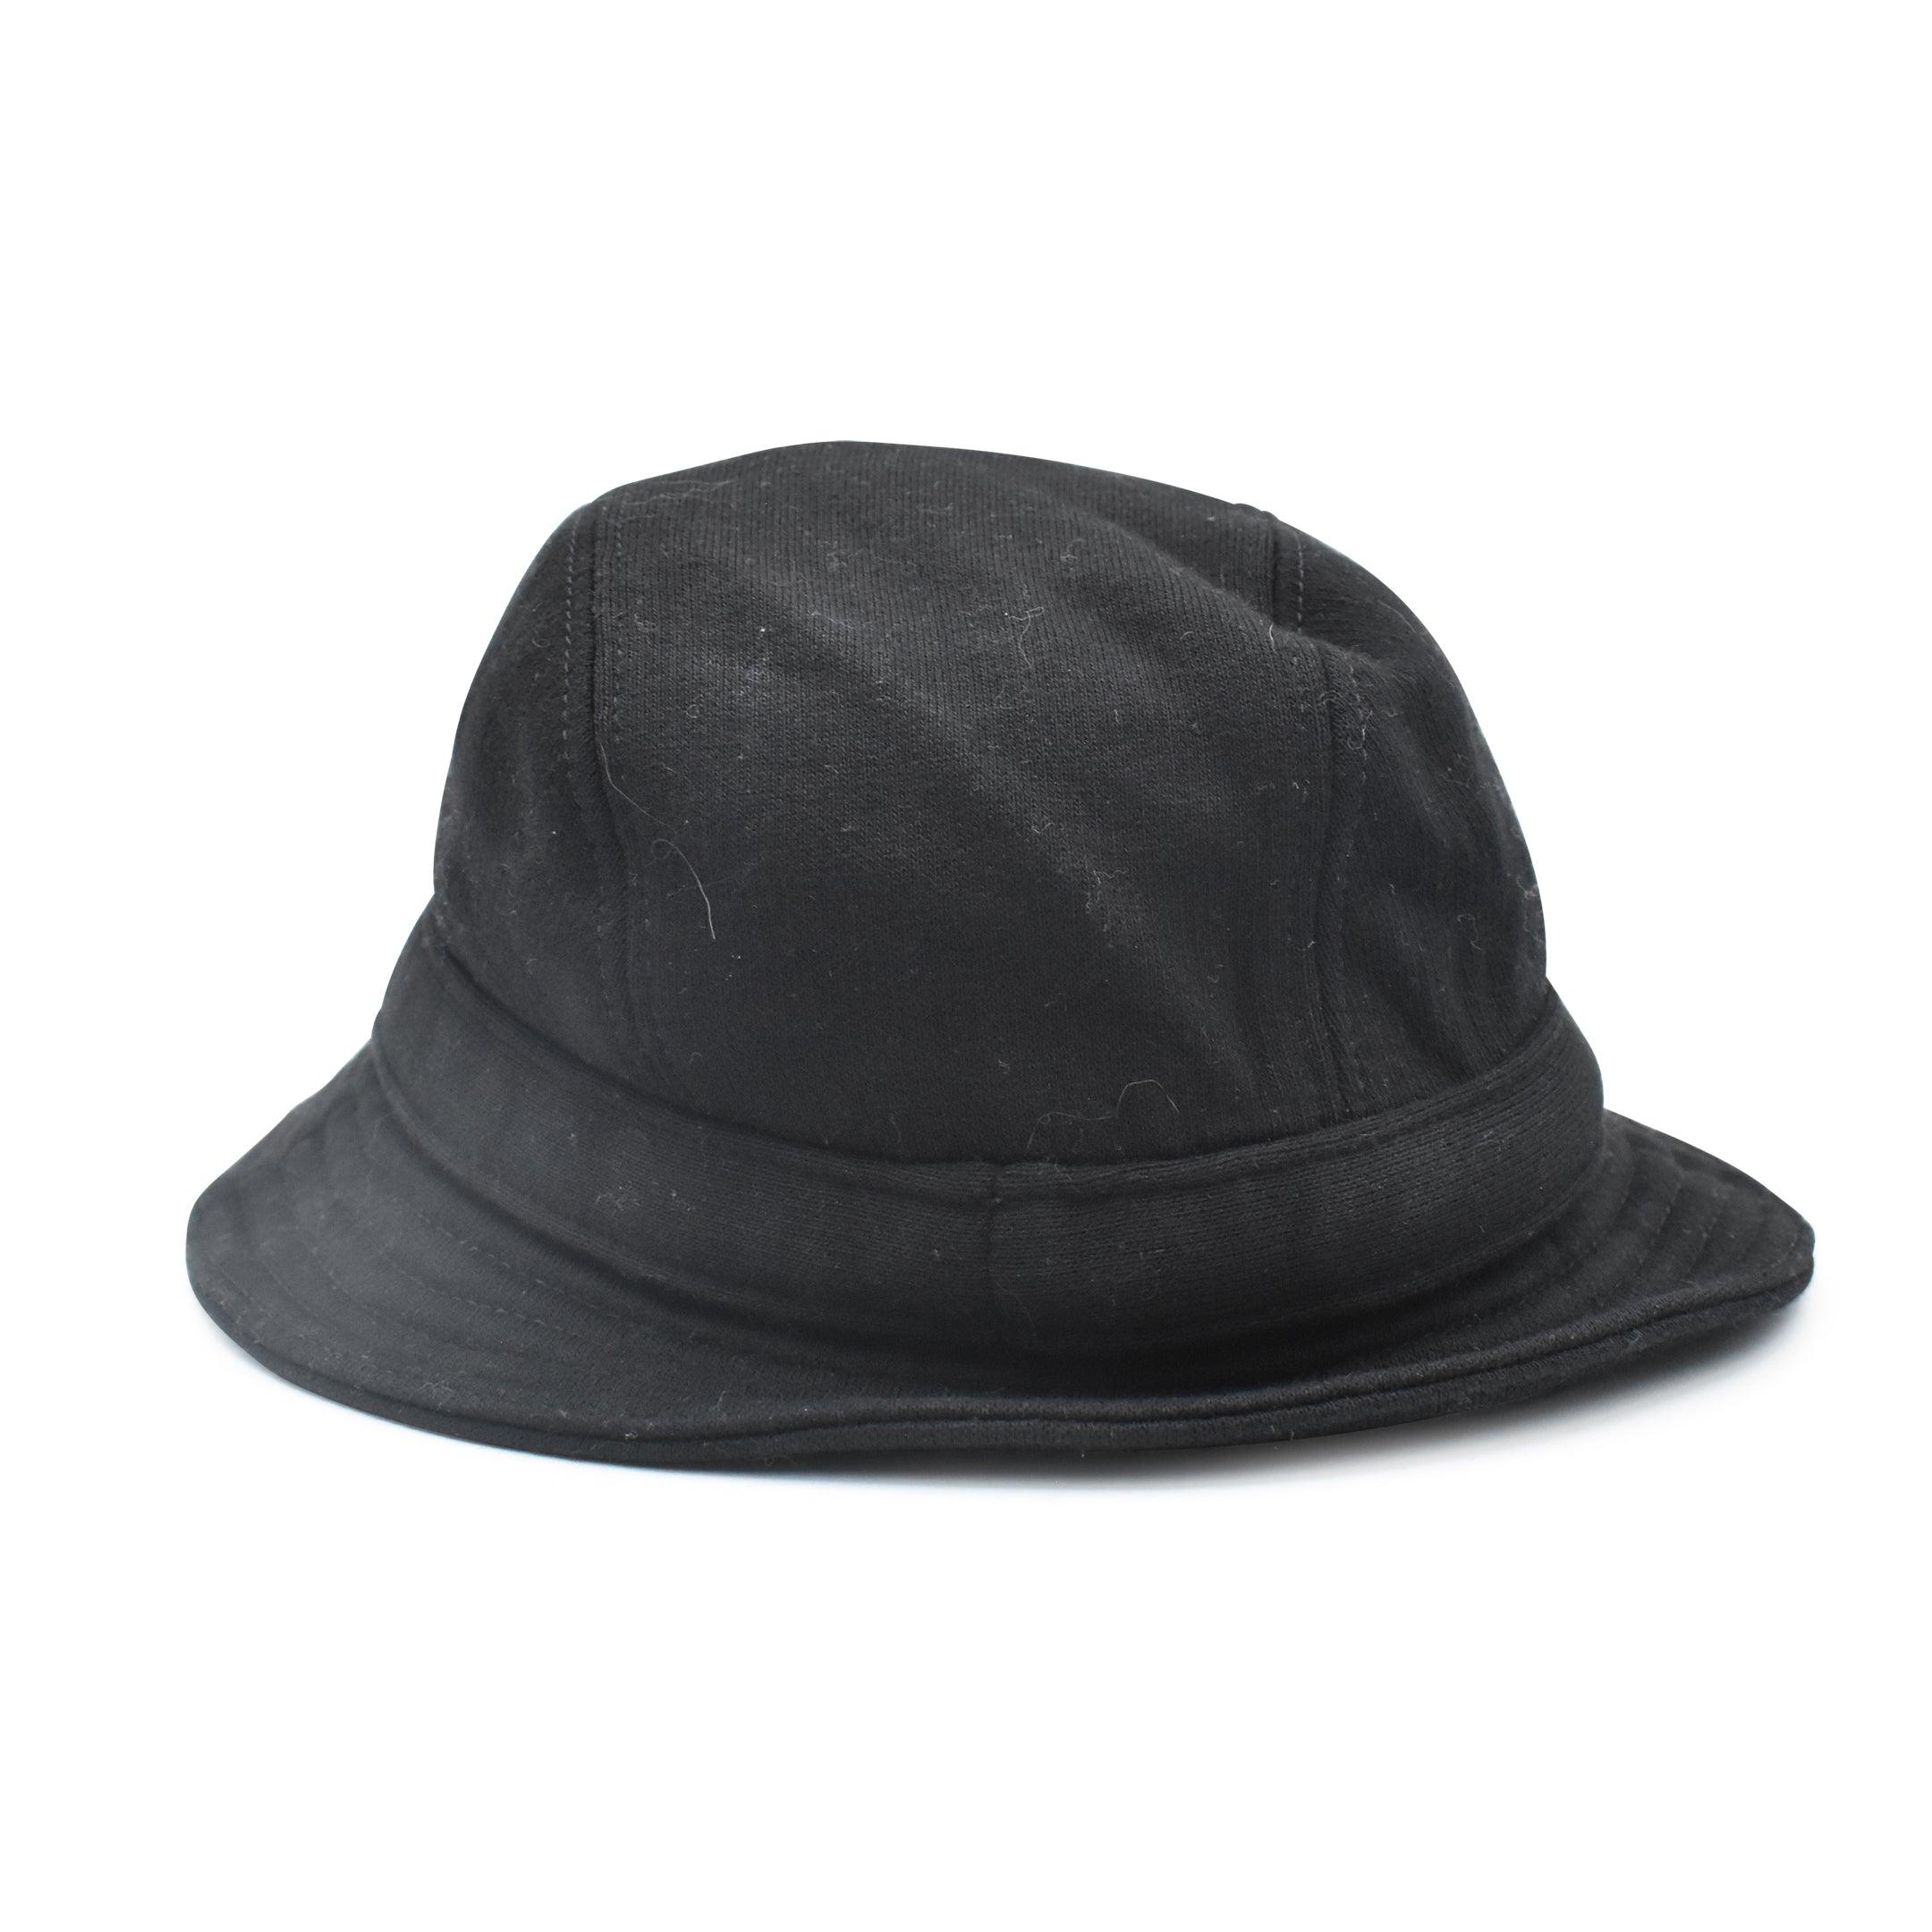 Burberry Bucket Hat - Kid's S - Fashionably Yours